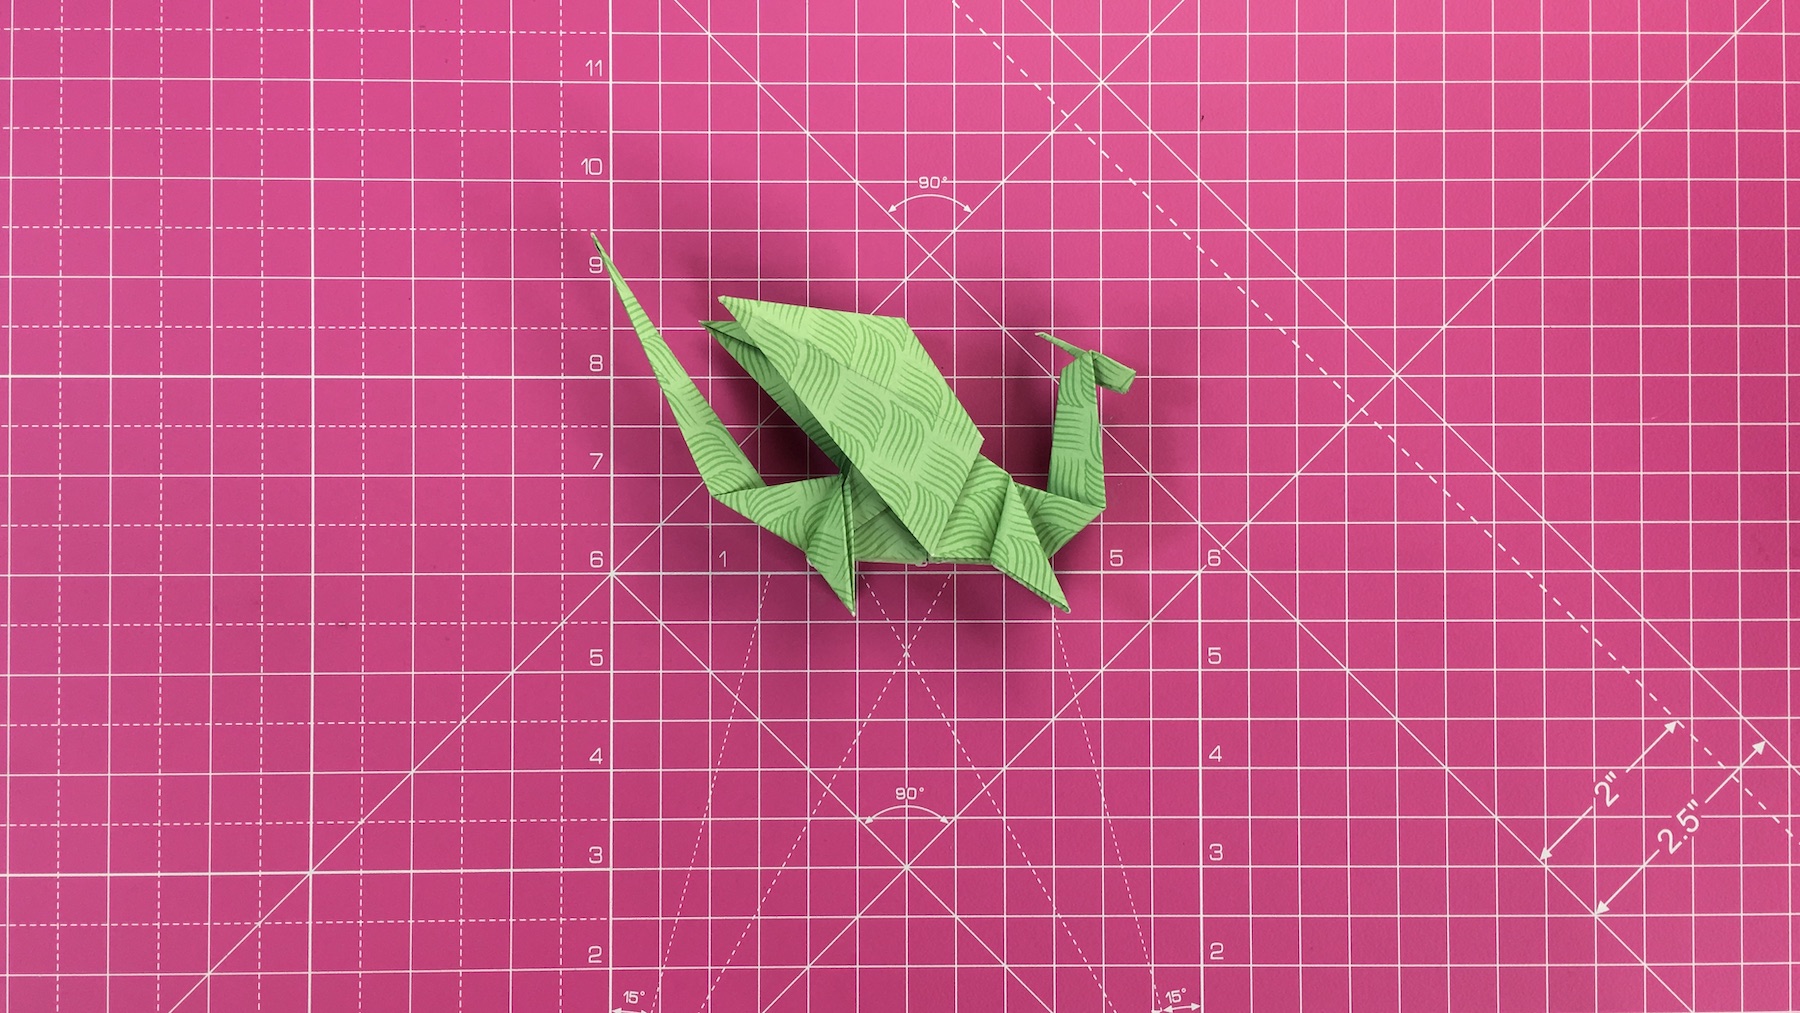 How to make an origami dragon, origami dragon tutorial - step 53